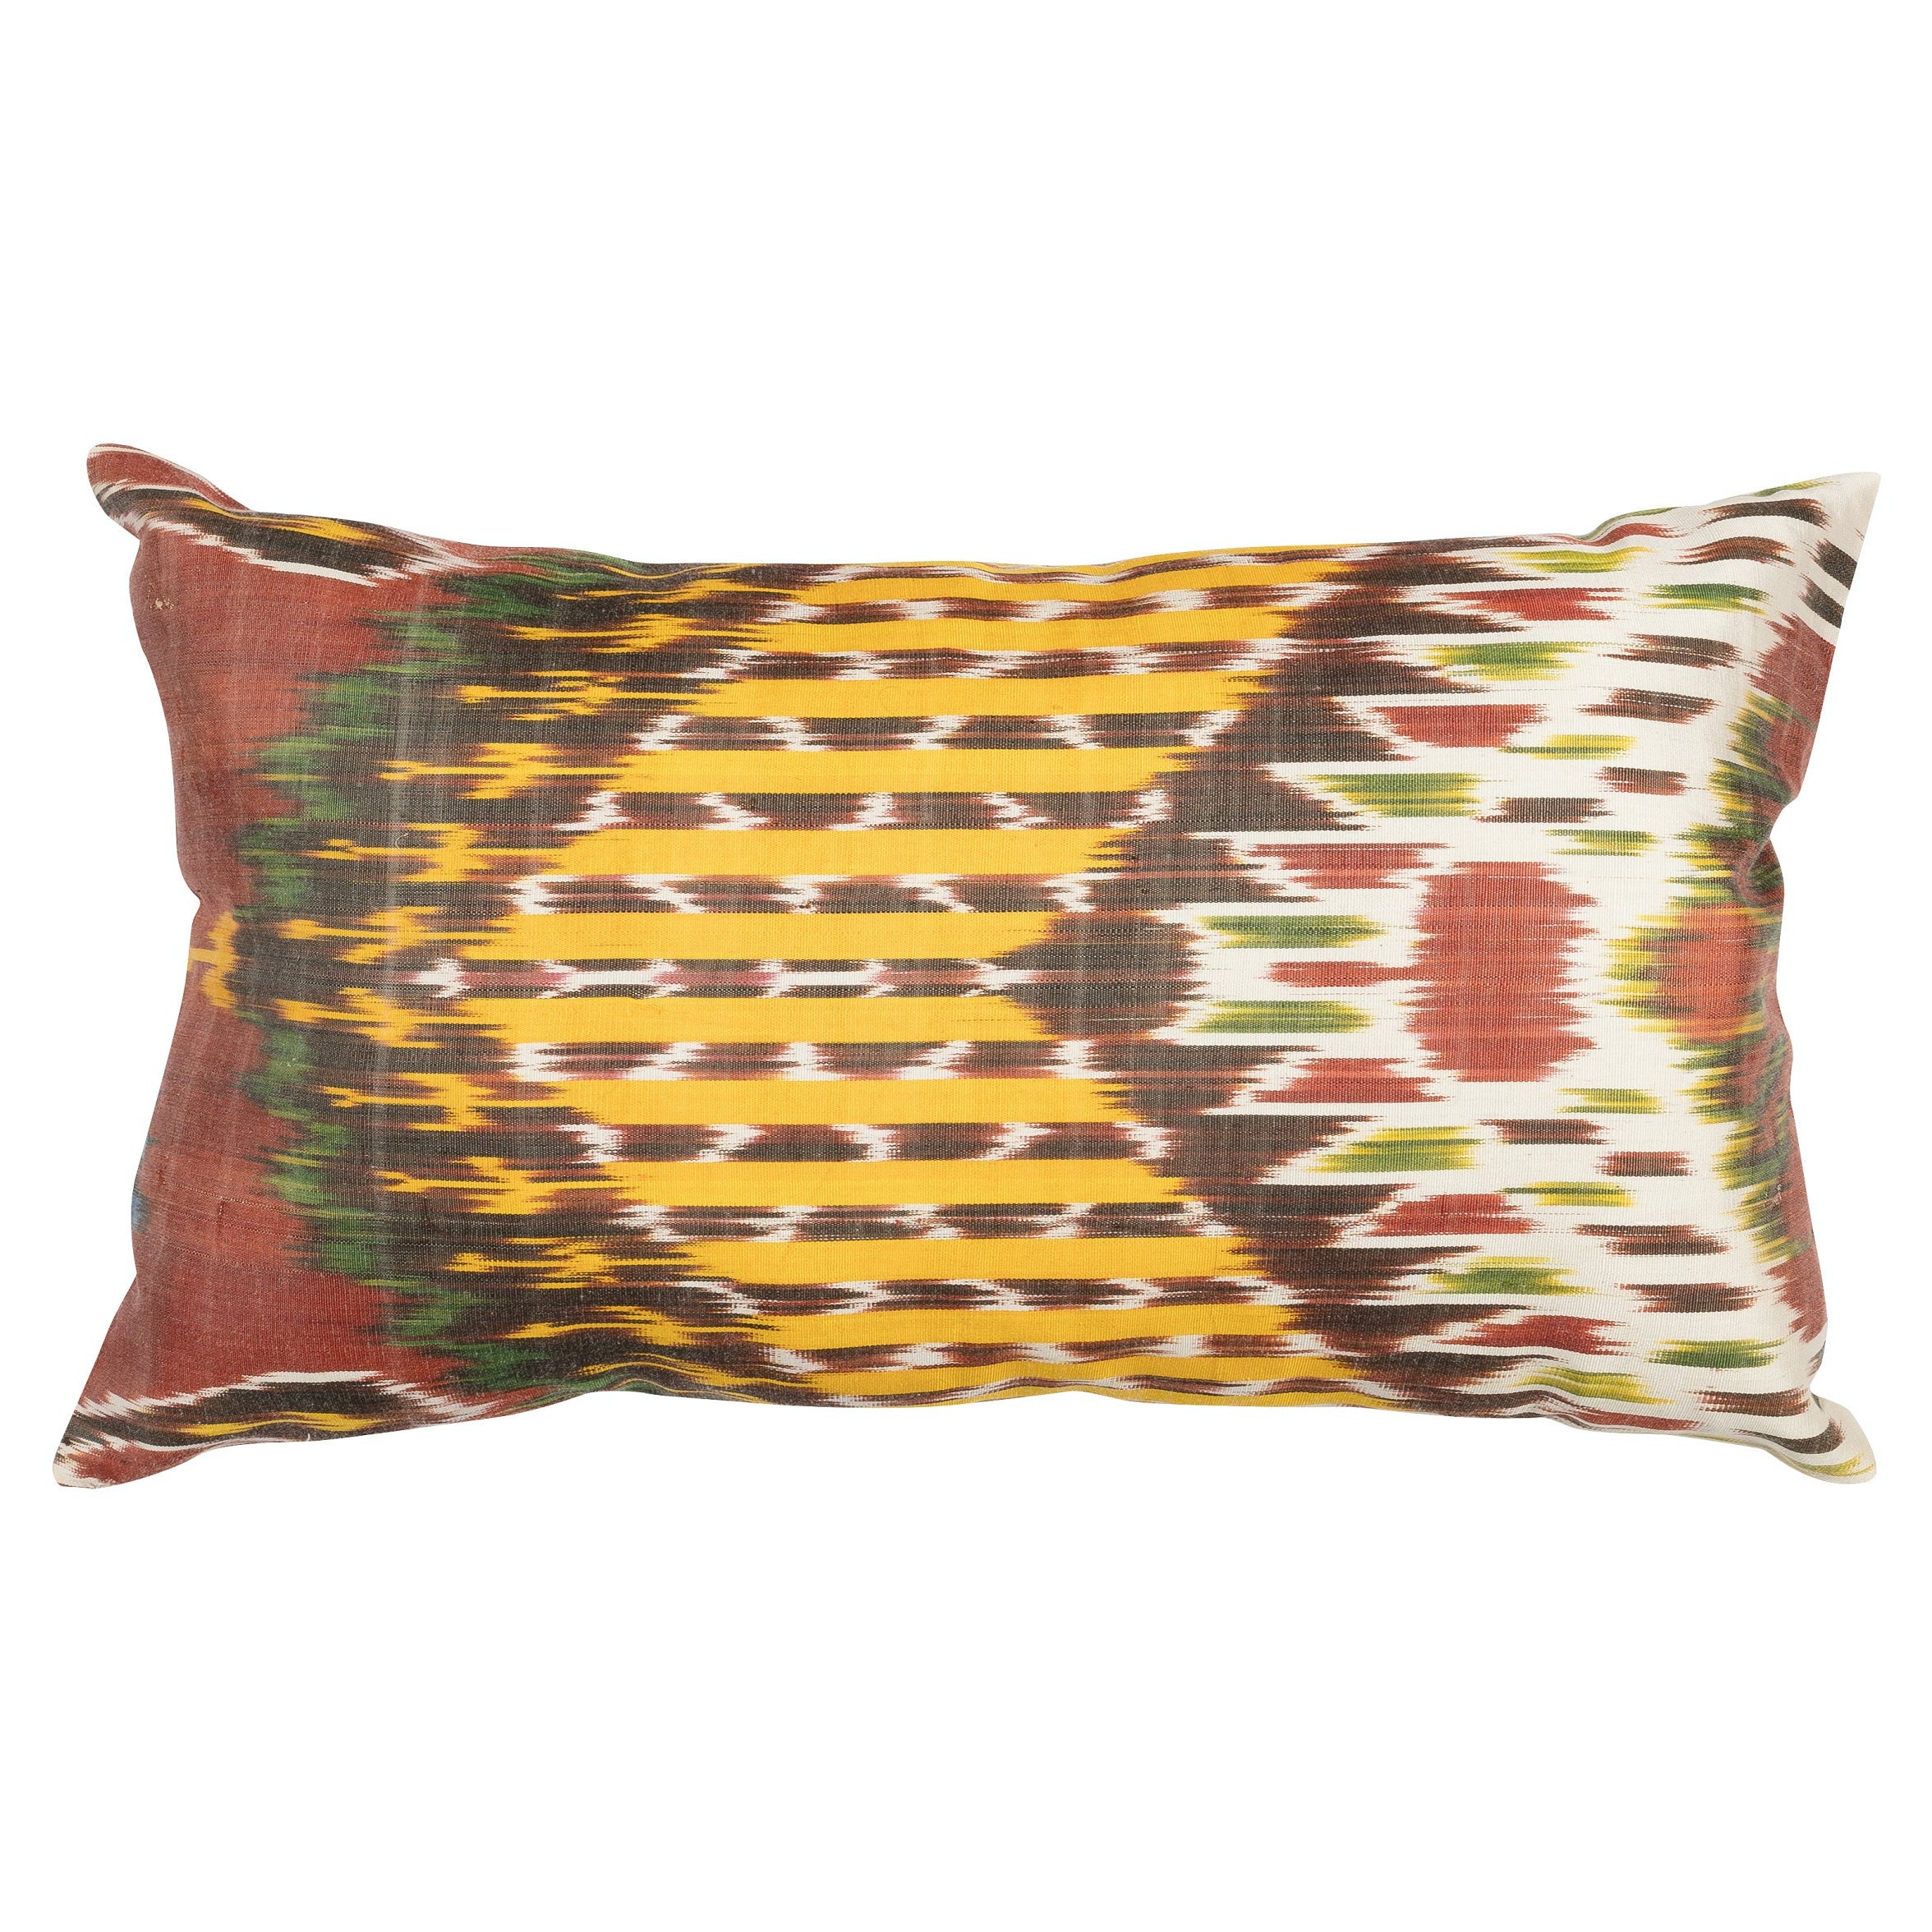 Decorative Yellow, Green, Red & Cream Tones Throw Pillow, Ikat Cushion Cover For Sale